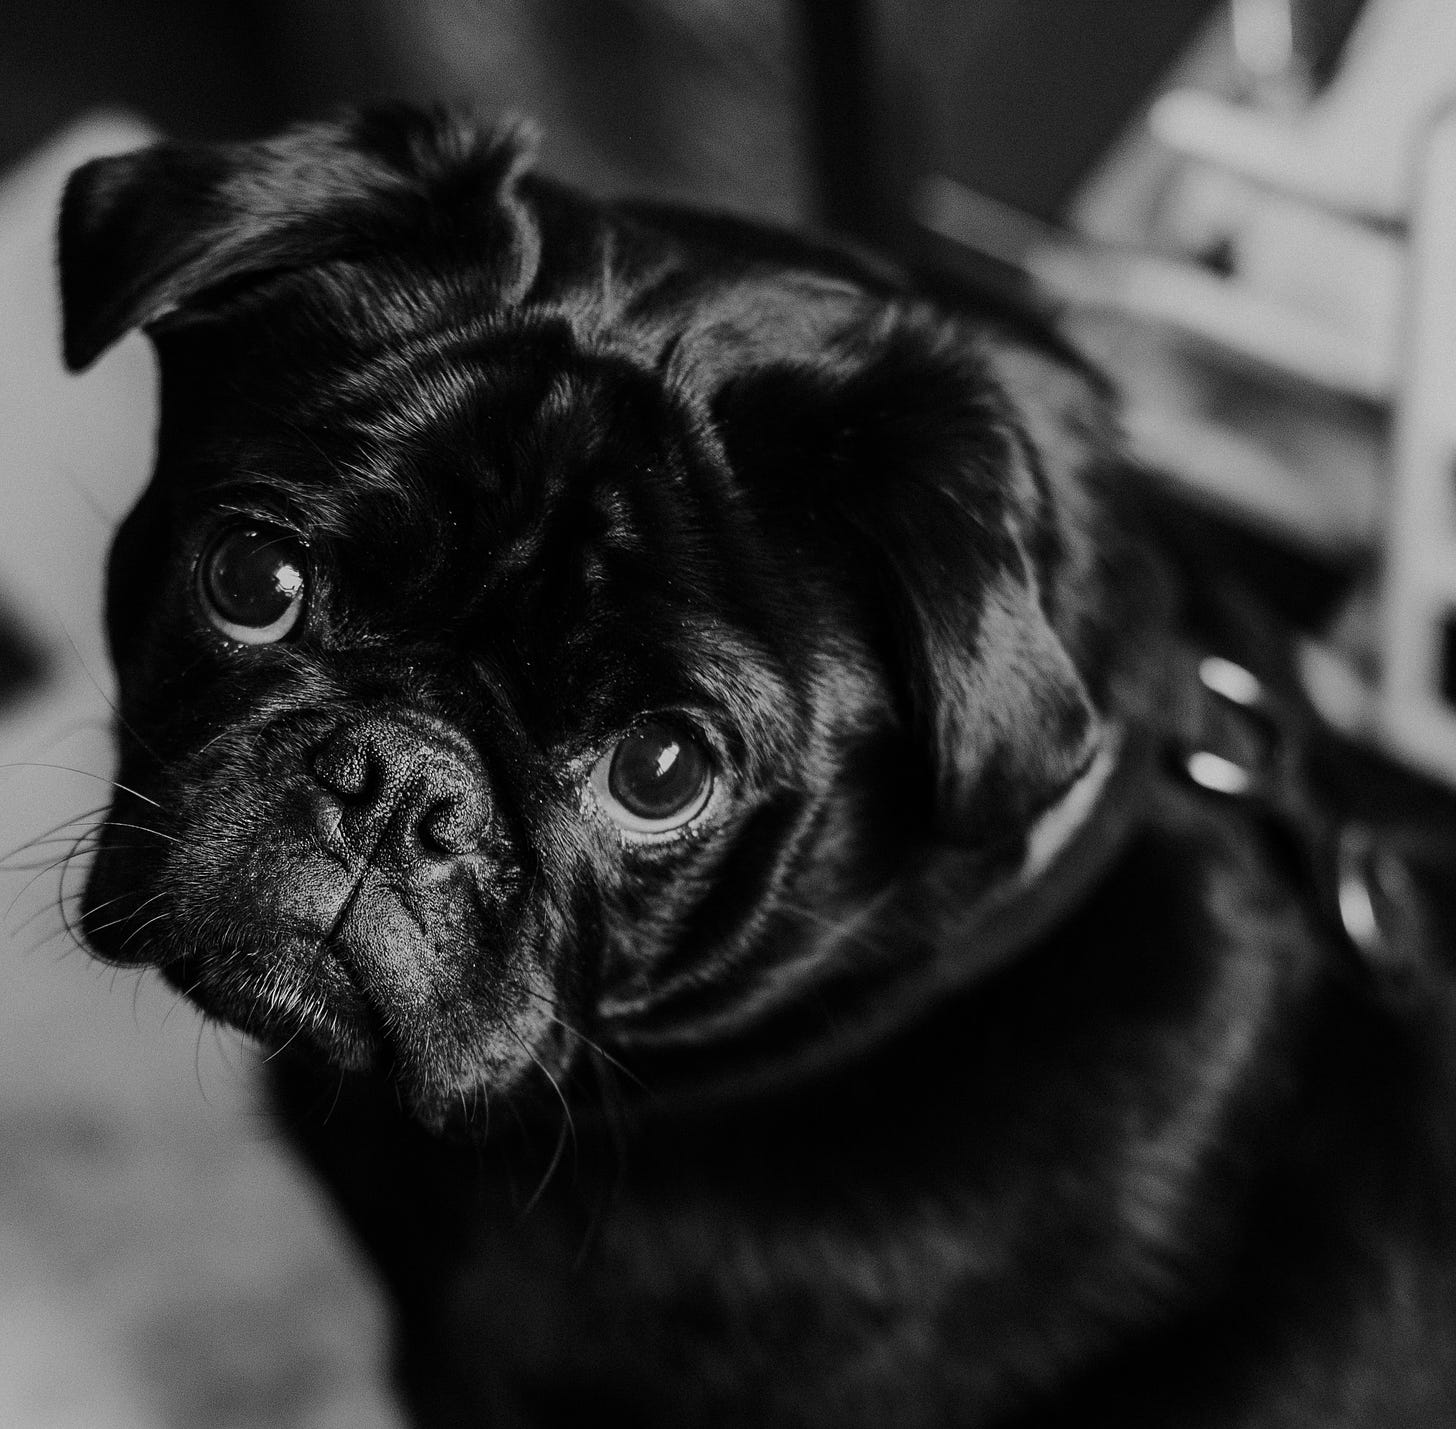 A small black dog looks at someone as if to apologize